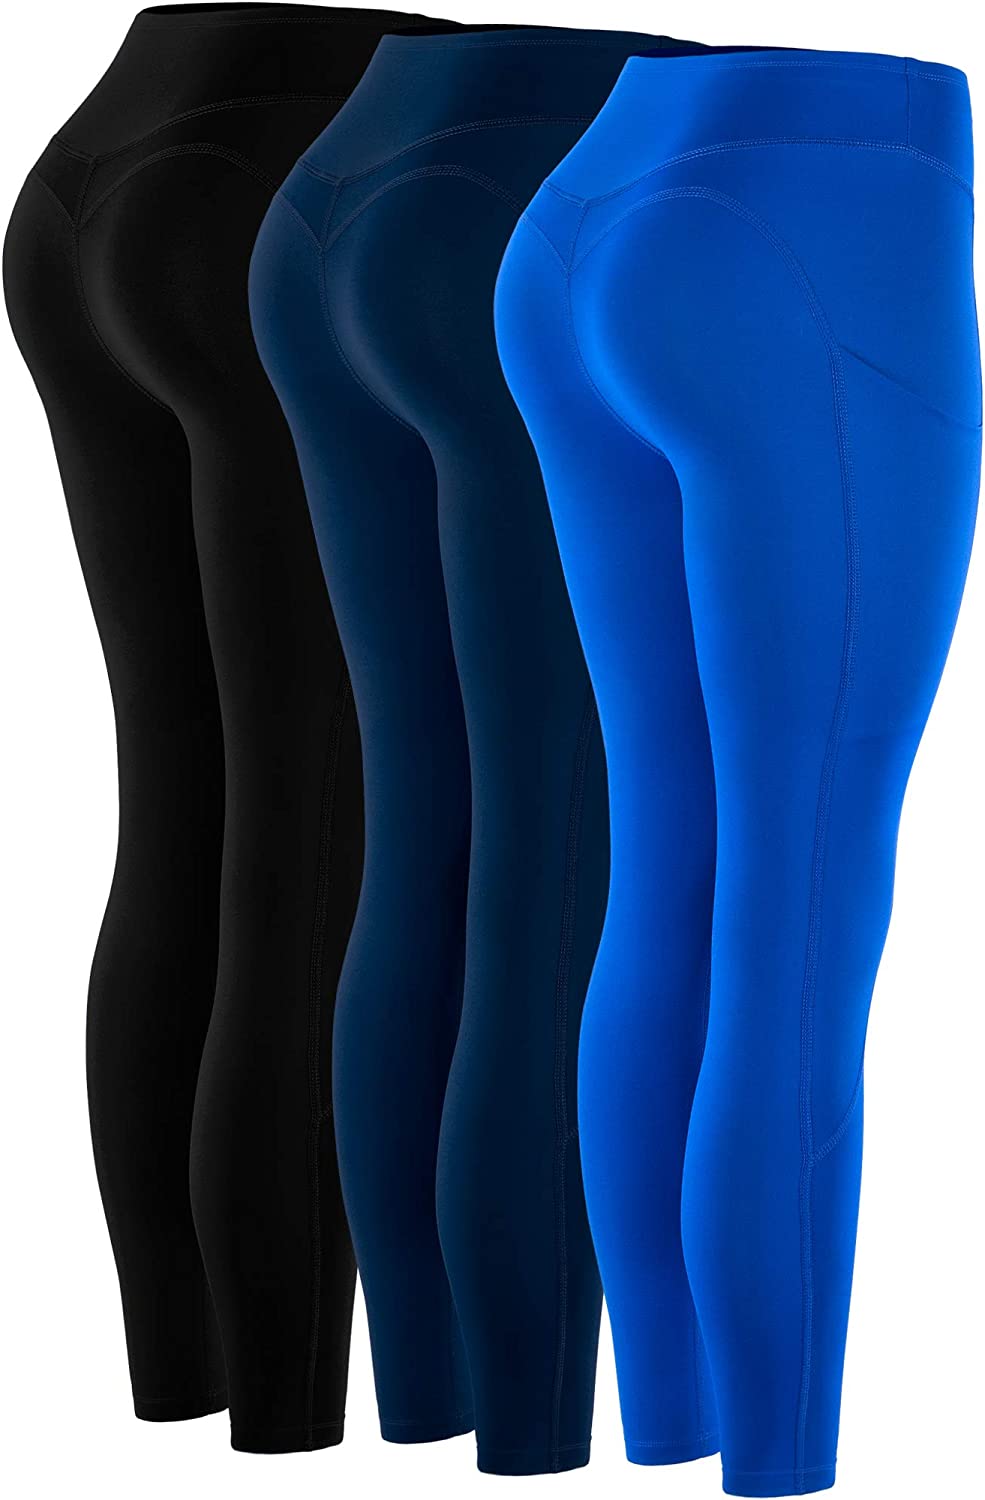 CADMUS High Waisted Workout Leggings for Women, Tummy Control Yoga Pants  with Po | eBay